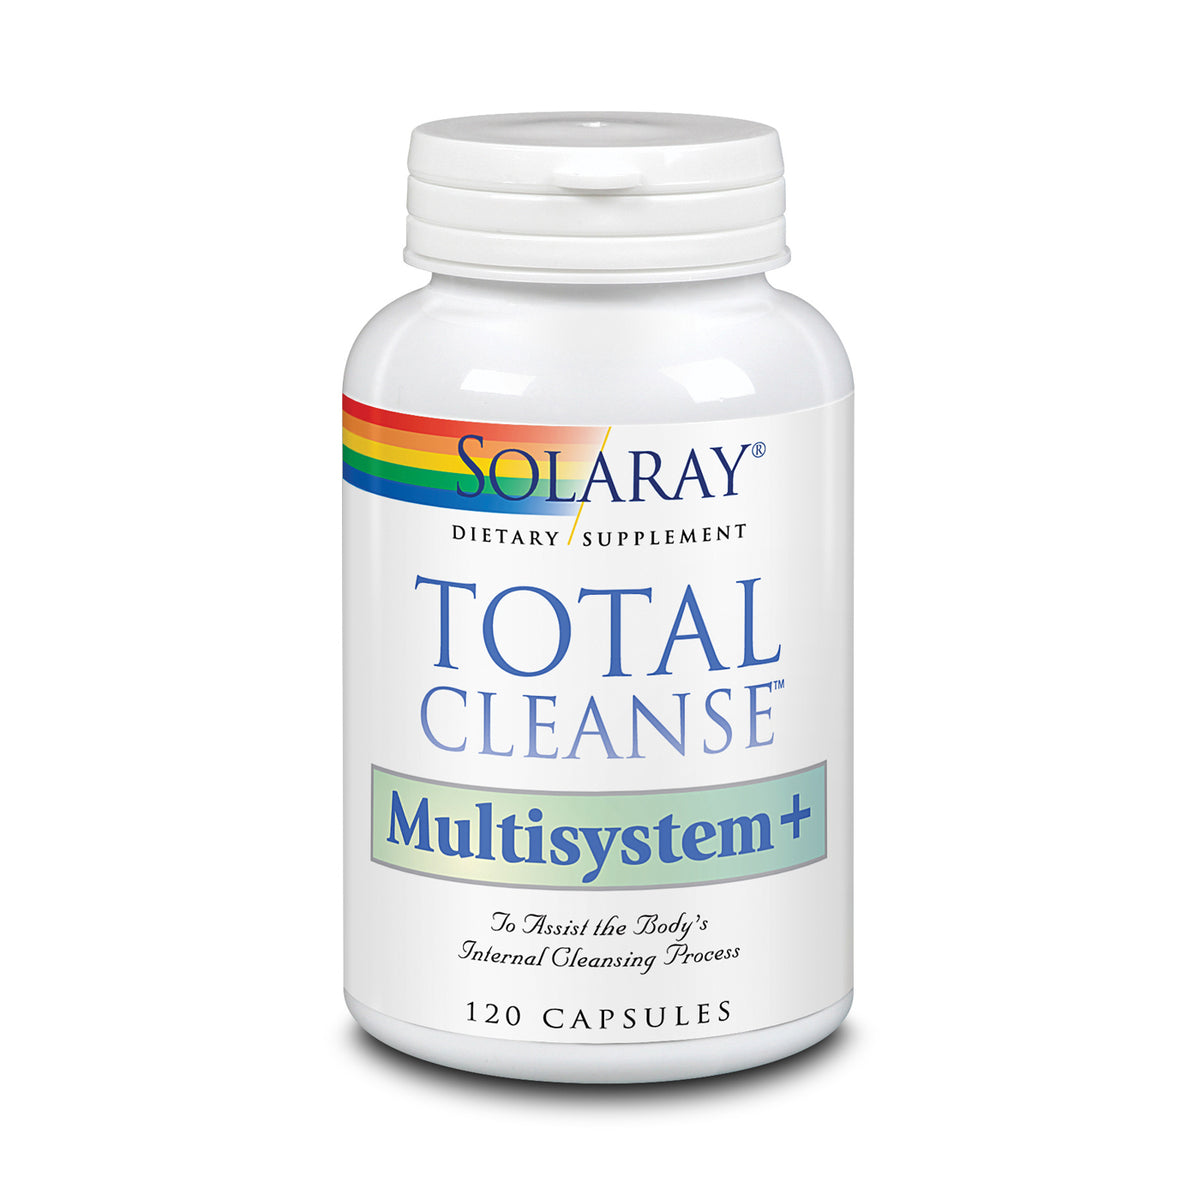 SOLARAY TOTAL CLEANSE MULTISYSTEM